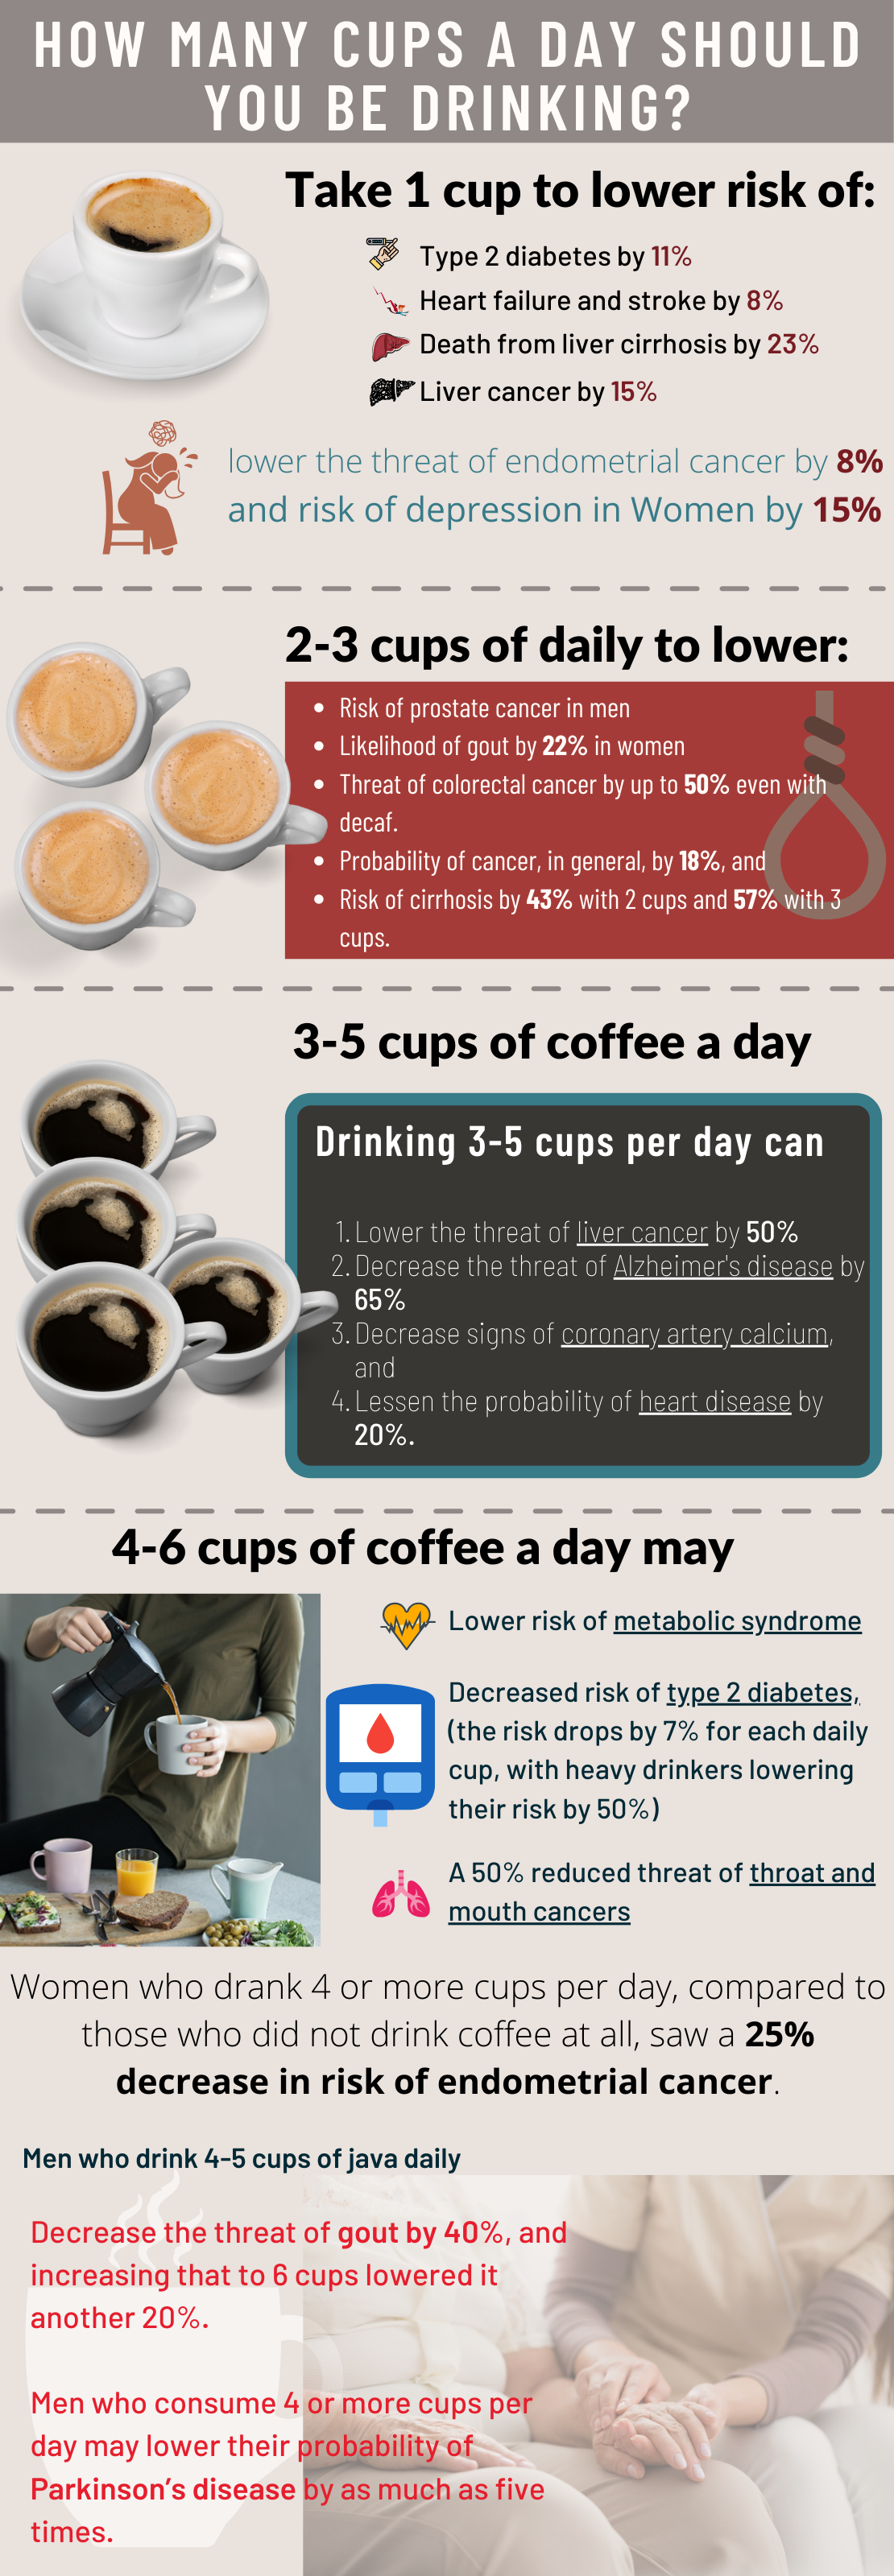 10 healthy reasons to drink coffee